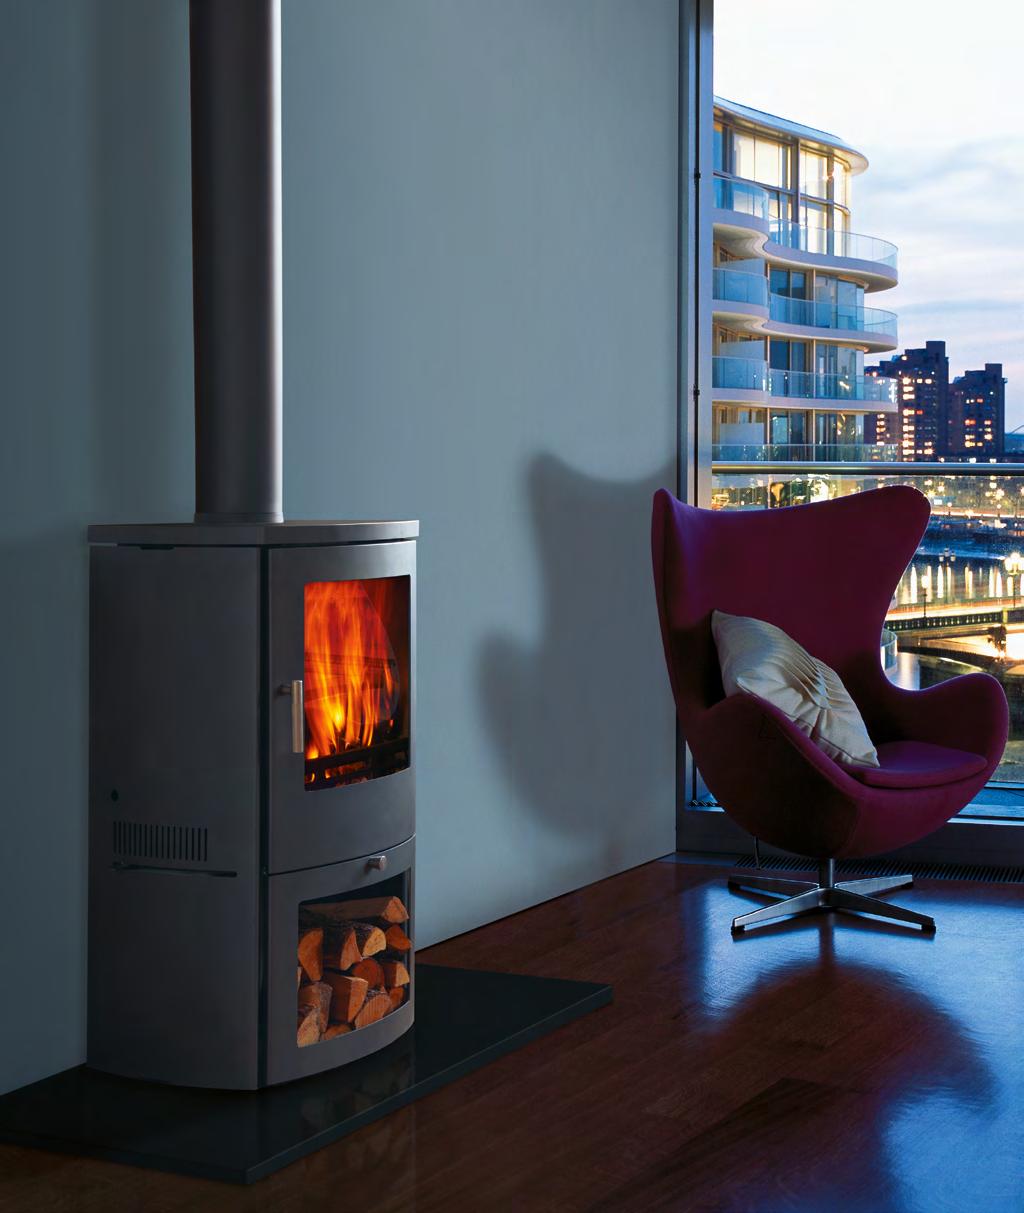 16 Chesney s Solid Fuel Stove Collection The Milan 6 series multi-fuel stove is shown in